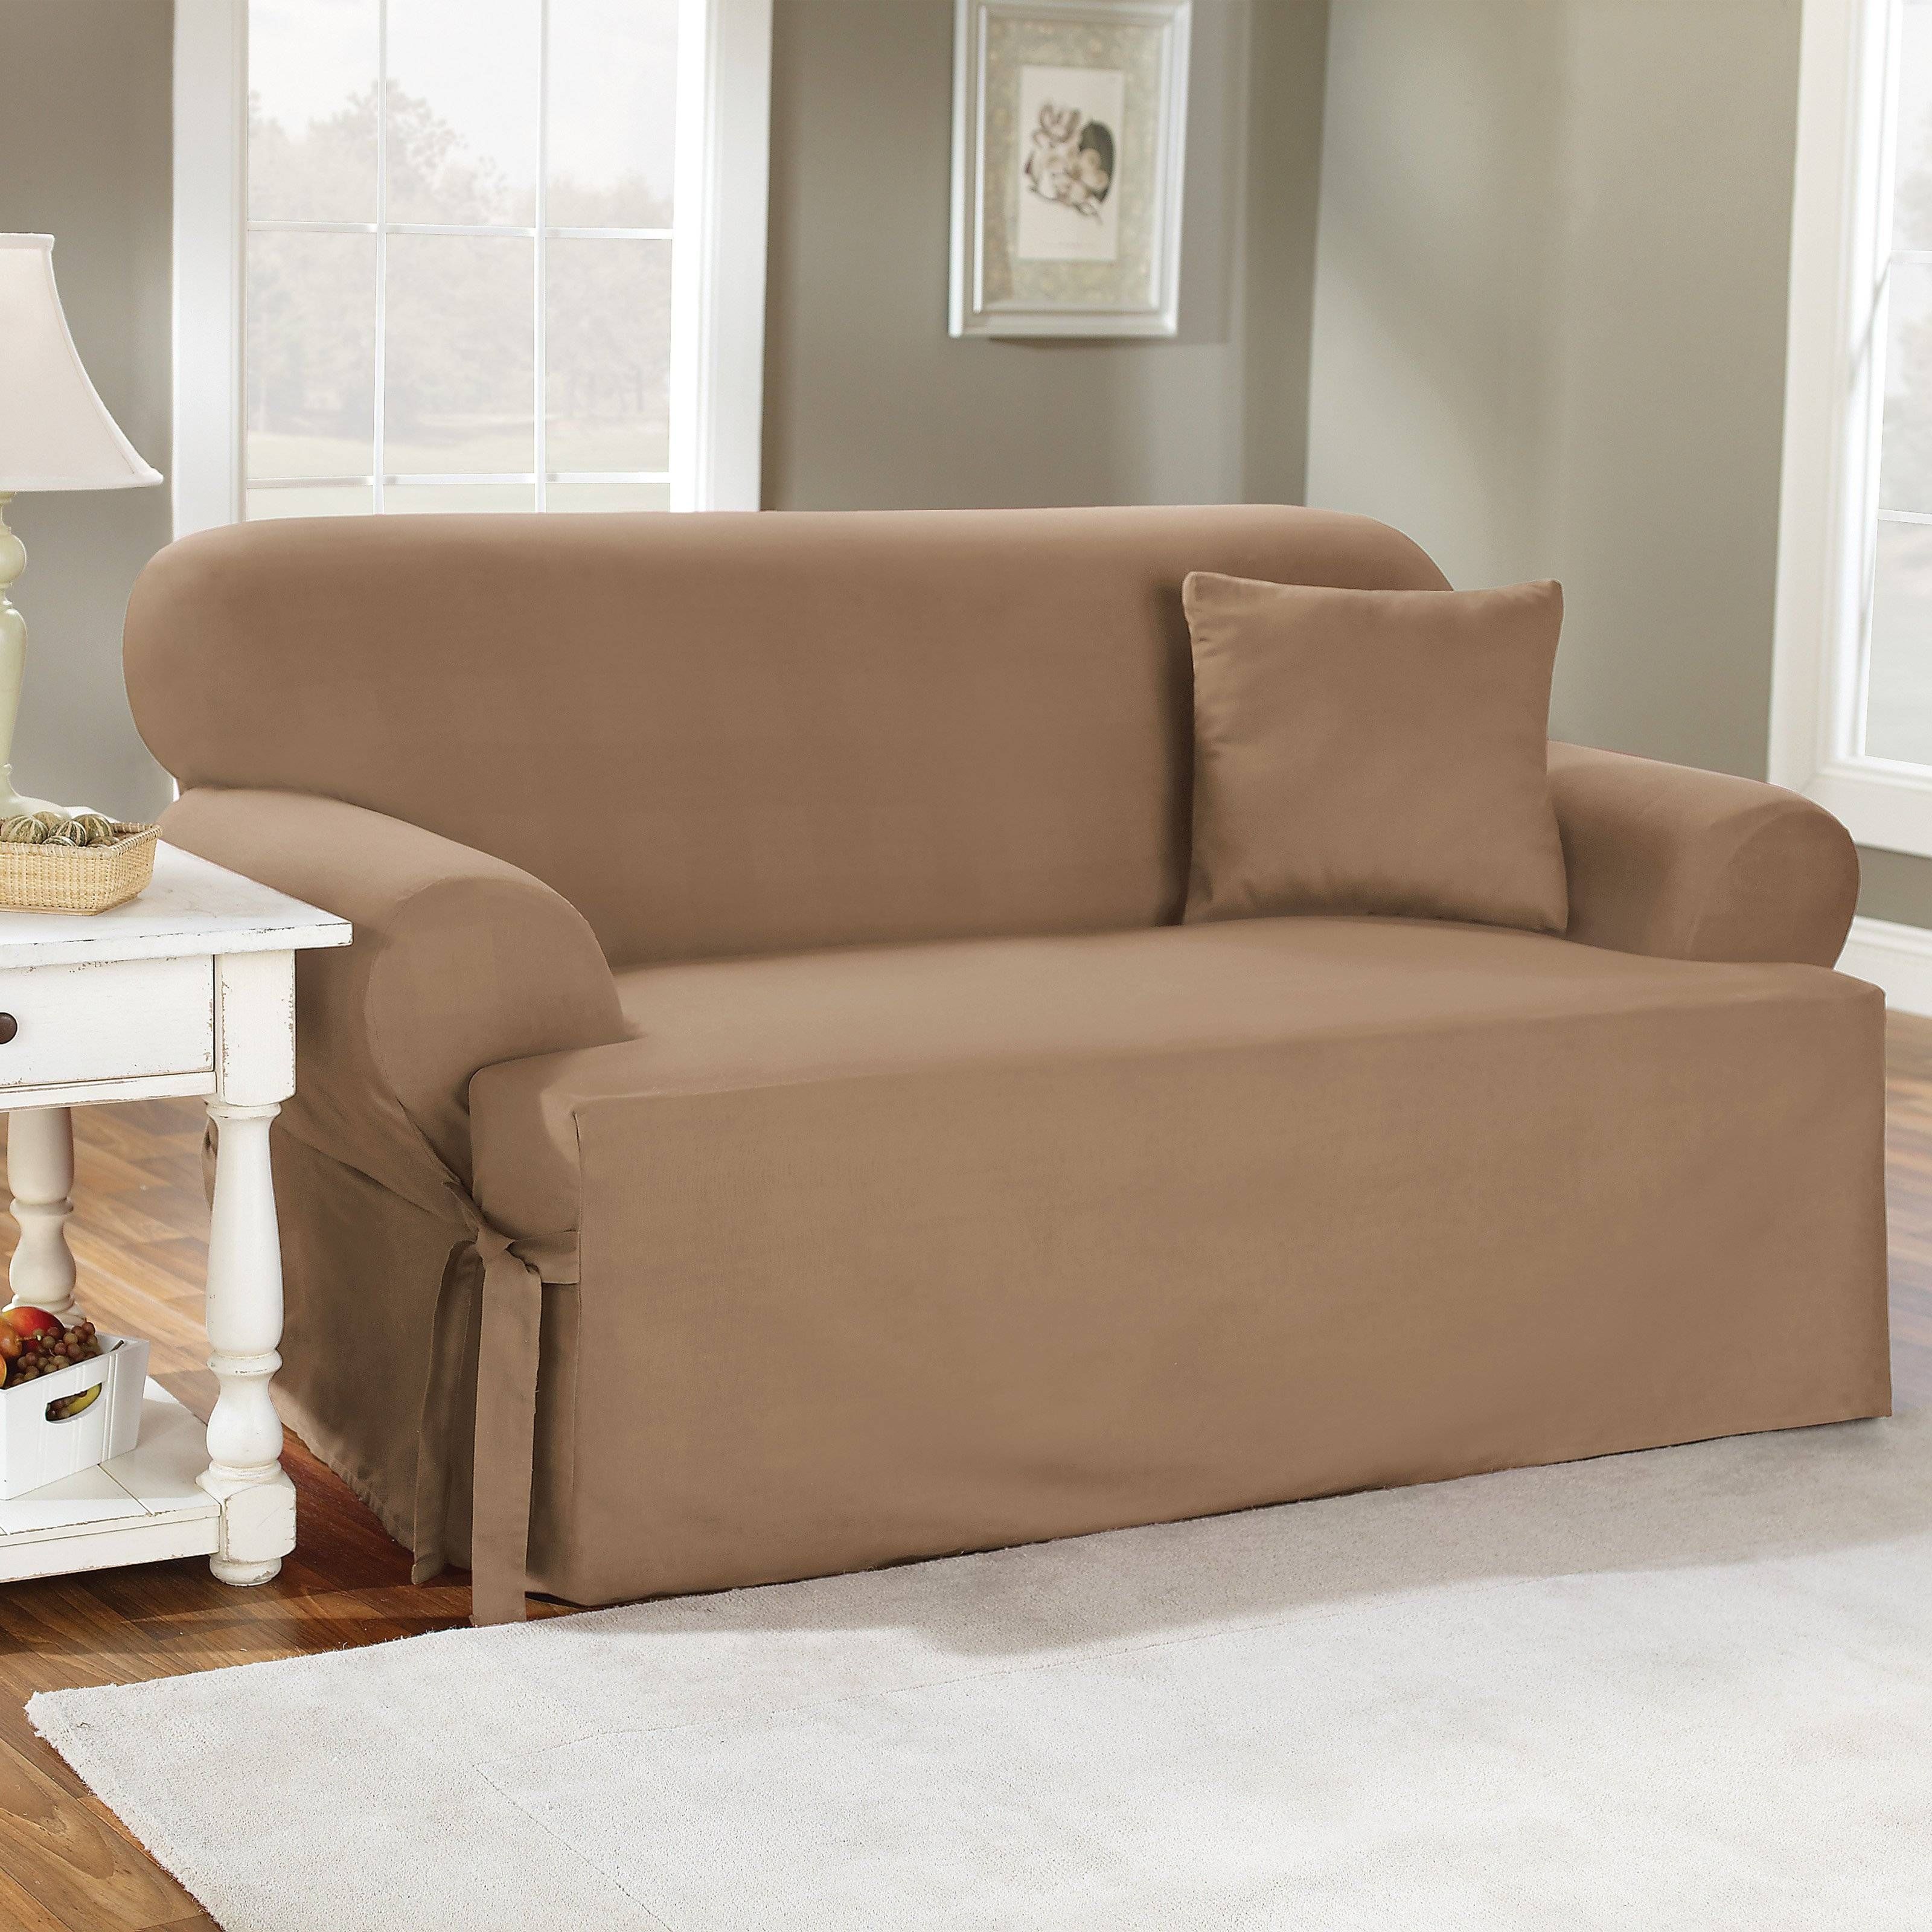 Furniture Couch Covers At Walmart Couch Covers Target Slip With Walmart Slipcovers For Sofas 